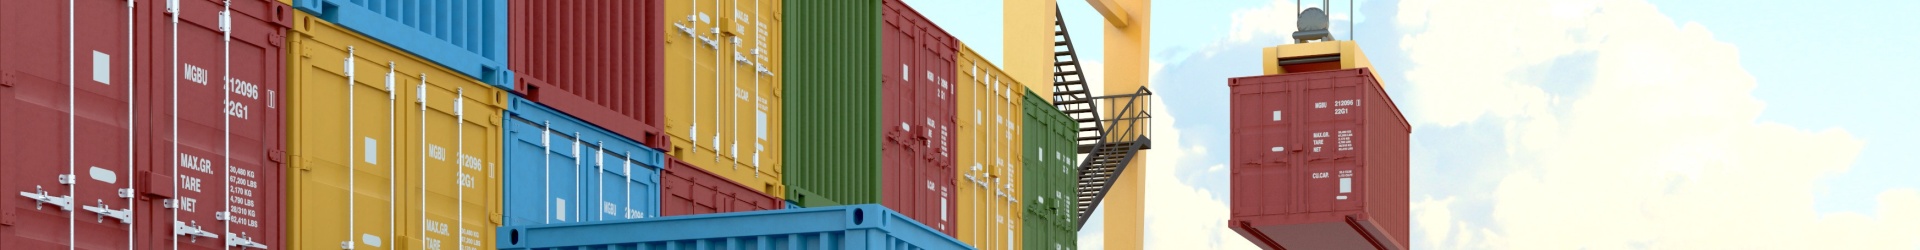 CONTAINERFAHRGESTELL